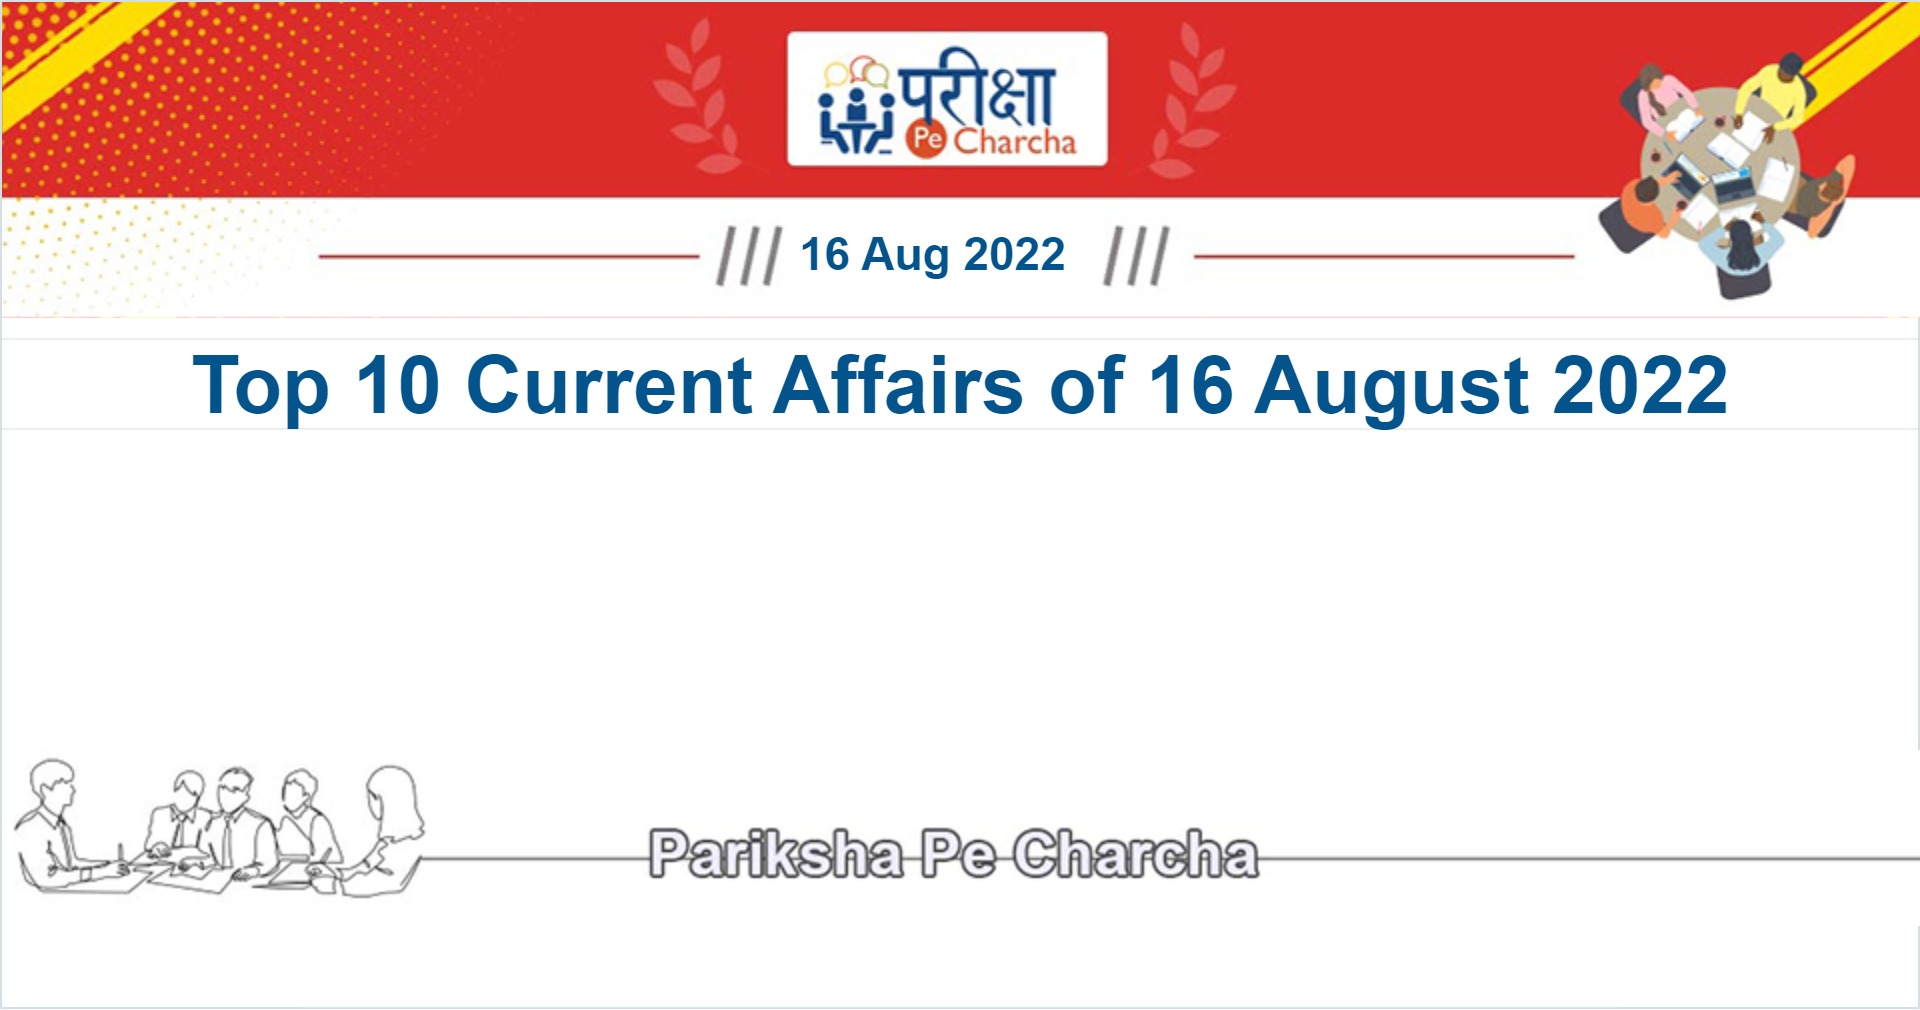 Current Affairs of 16 August 2022 in English and Hindi